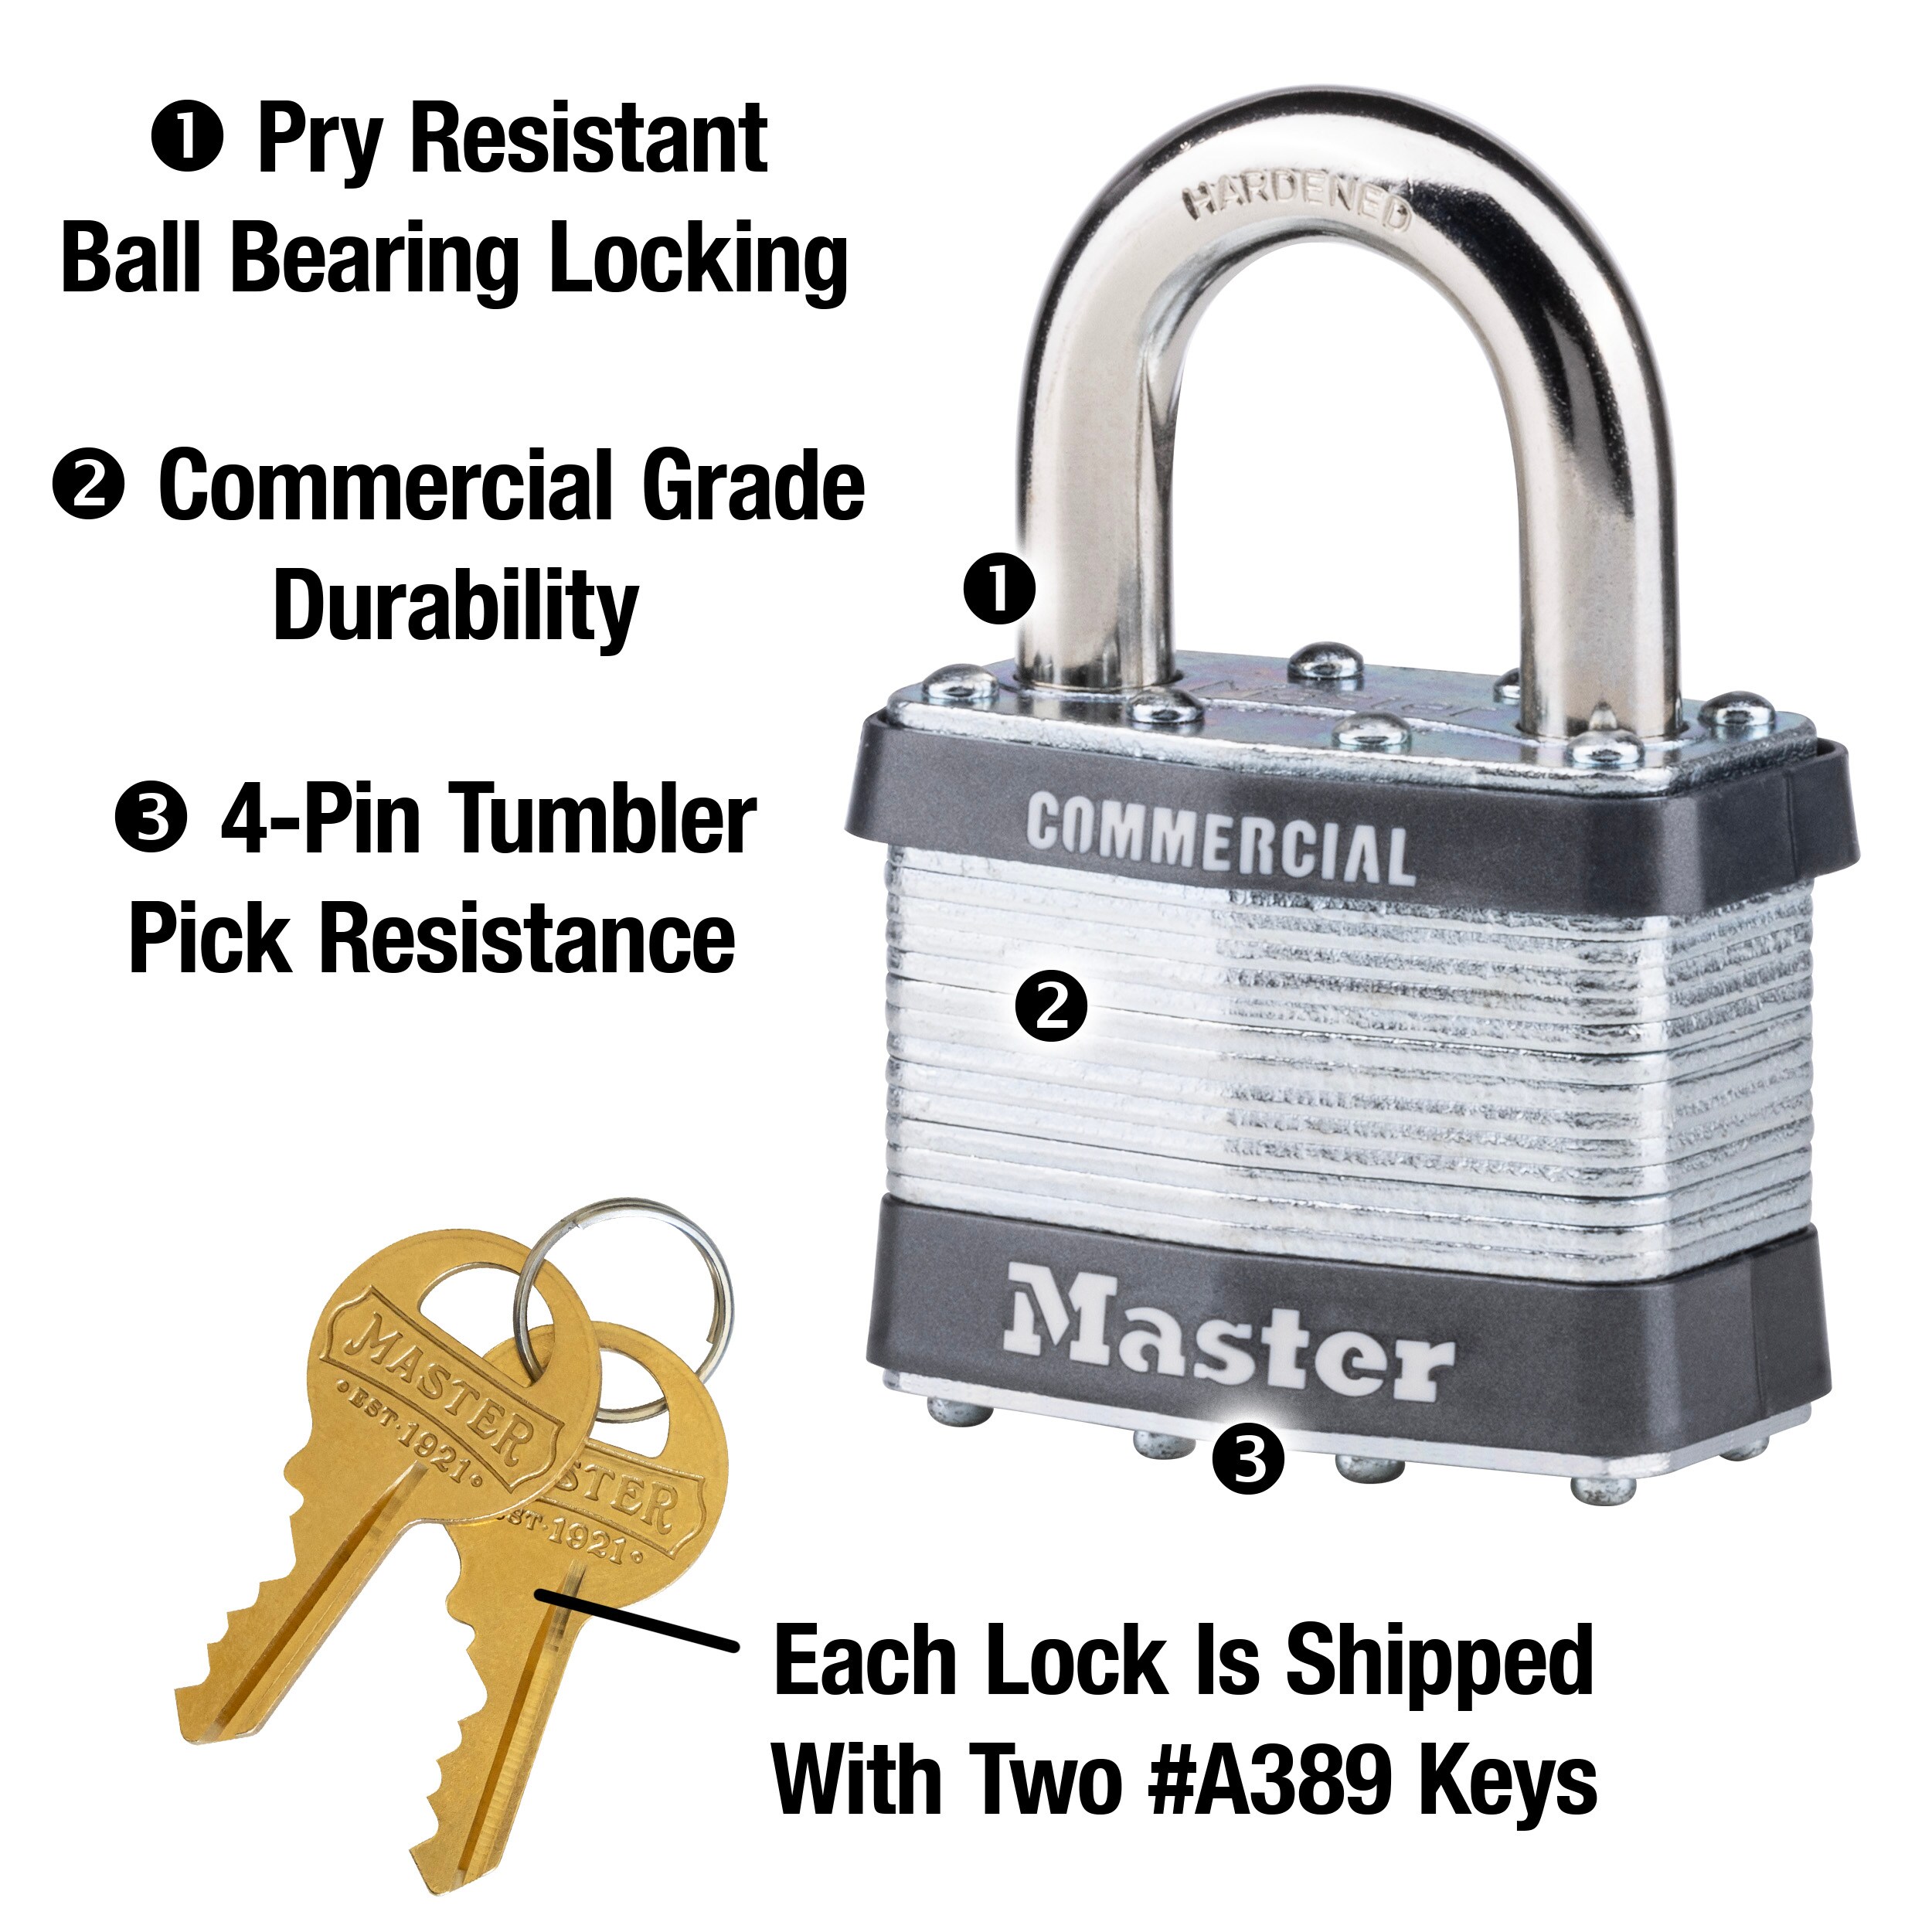 Master Lock Commercial Keyed Padlock, 2-in Wide x 1-in Shackle Keyed Alike  to A389 Key Code in the Padlocks department at